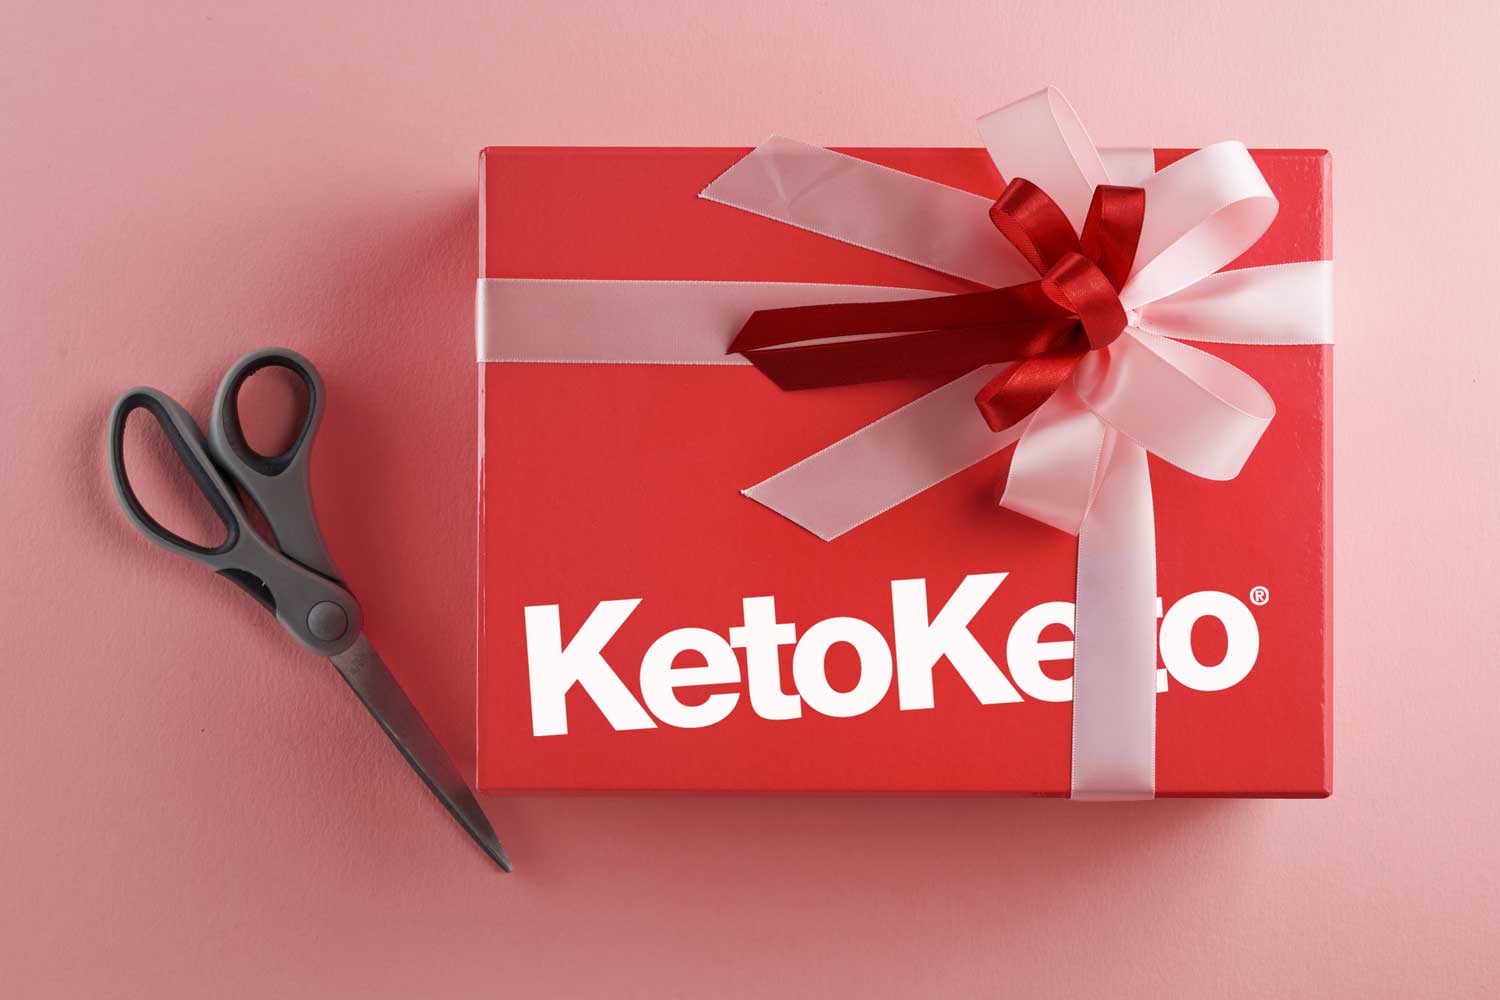 Ultimate Keto Guide to Gift Giving for a Keto Friend! - Keen for Keto